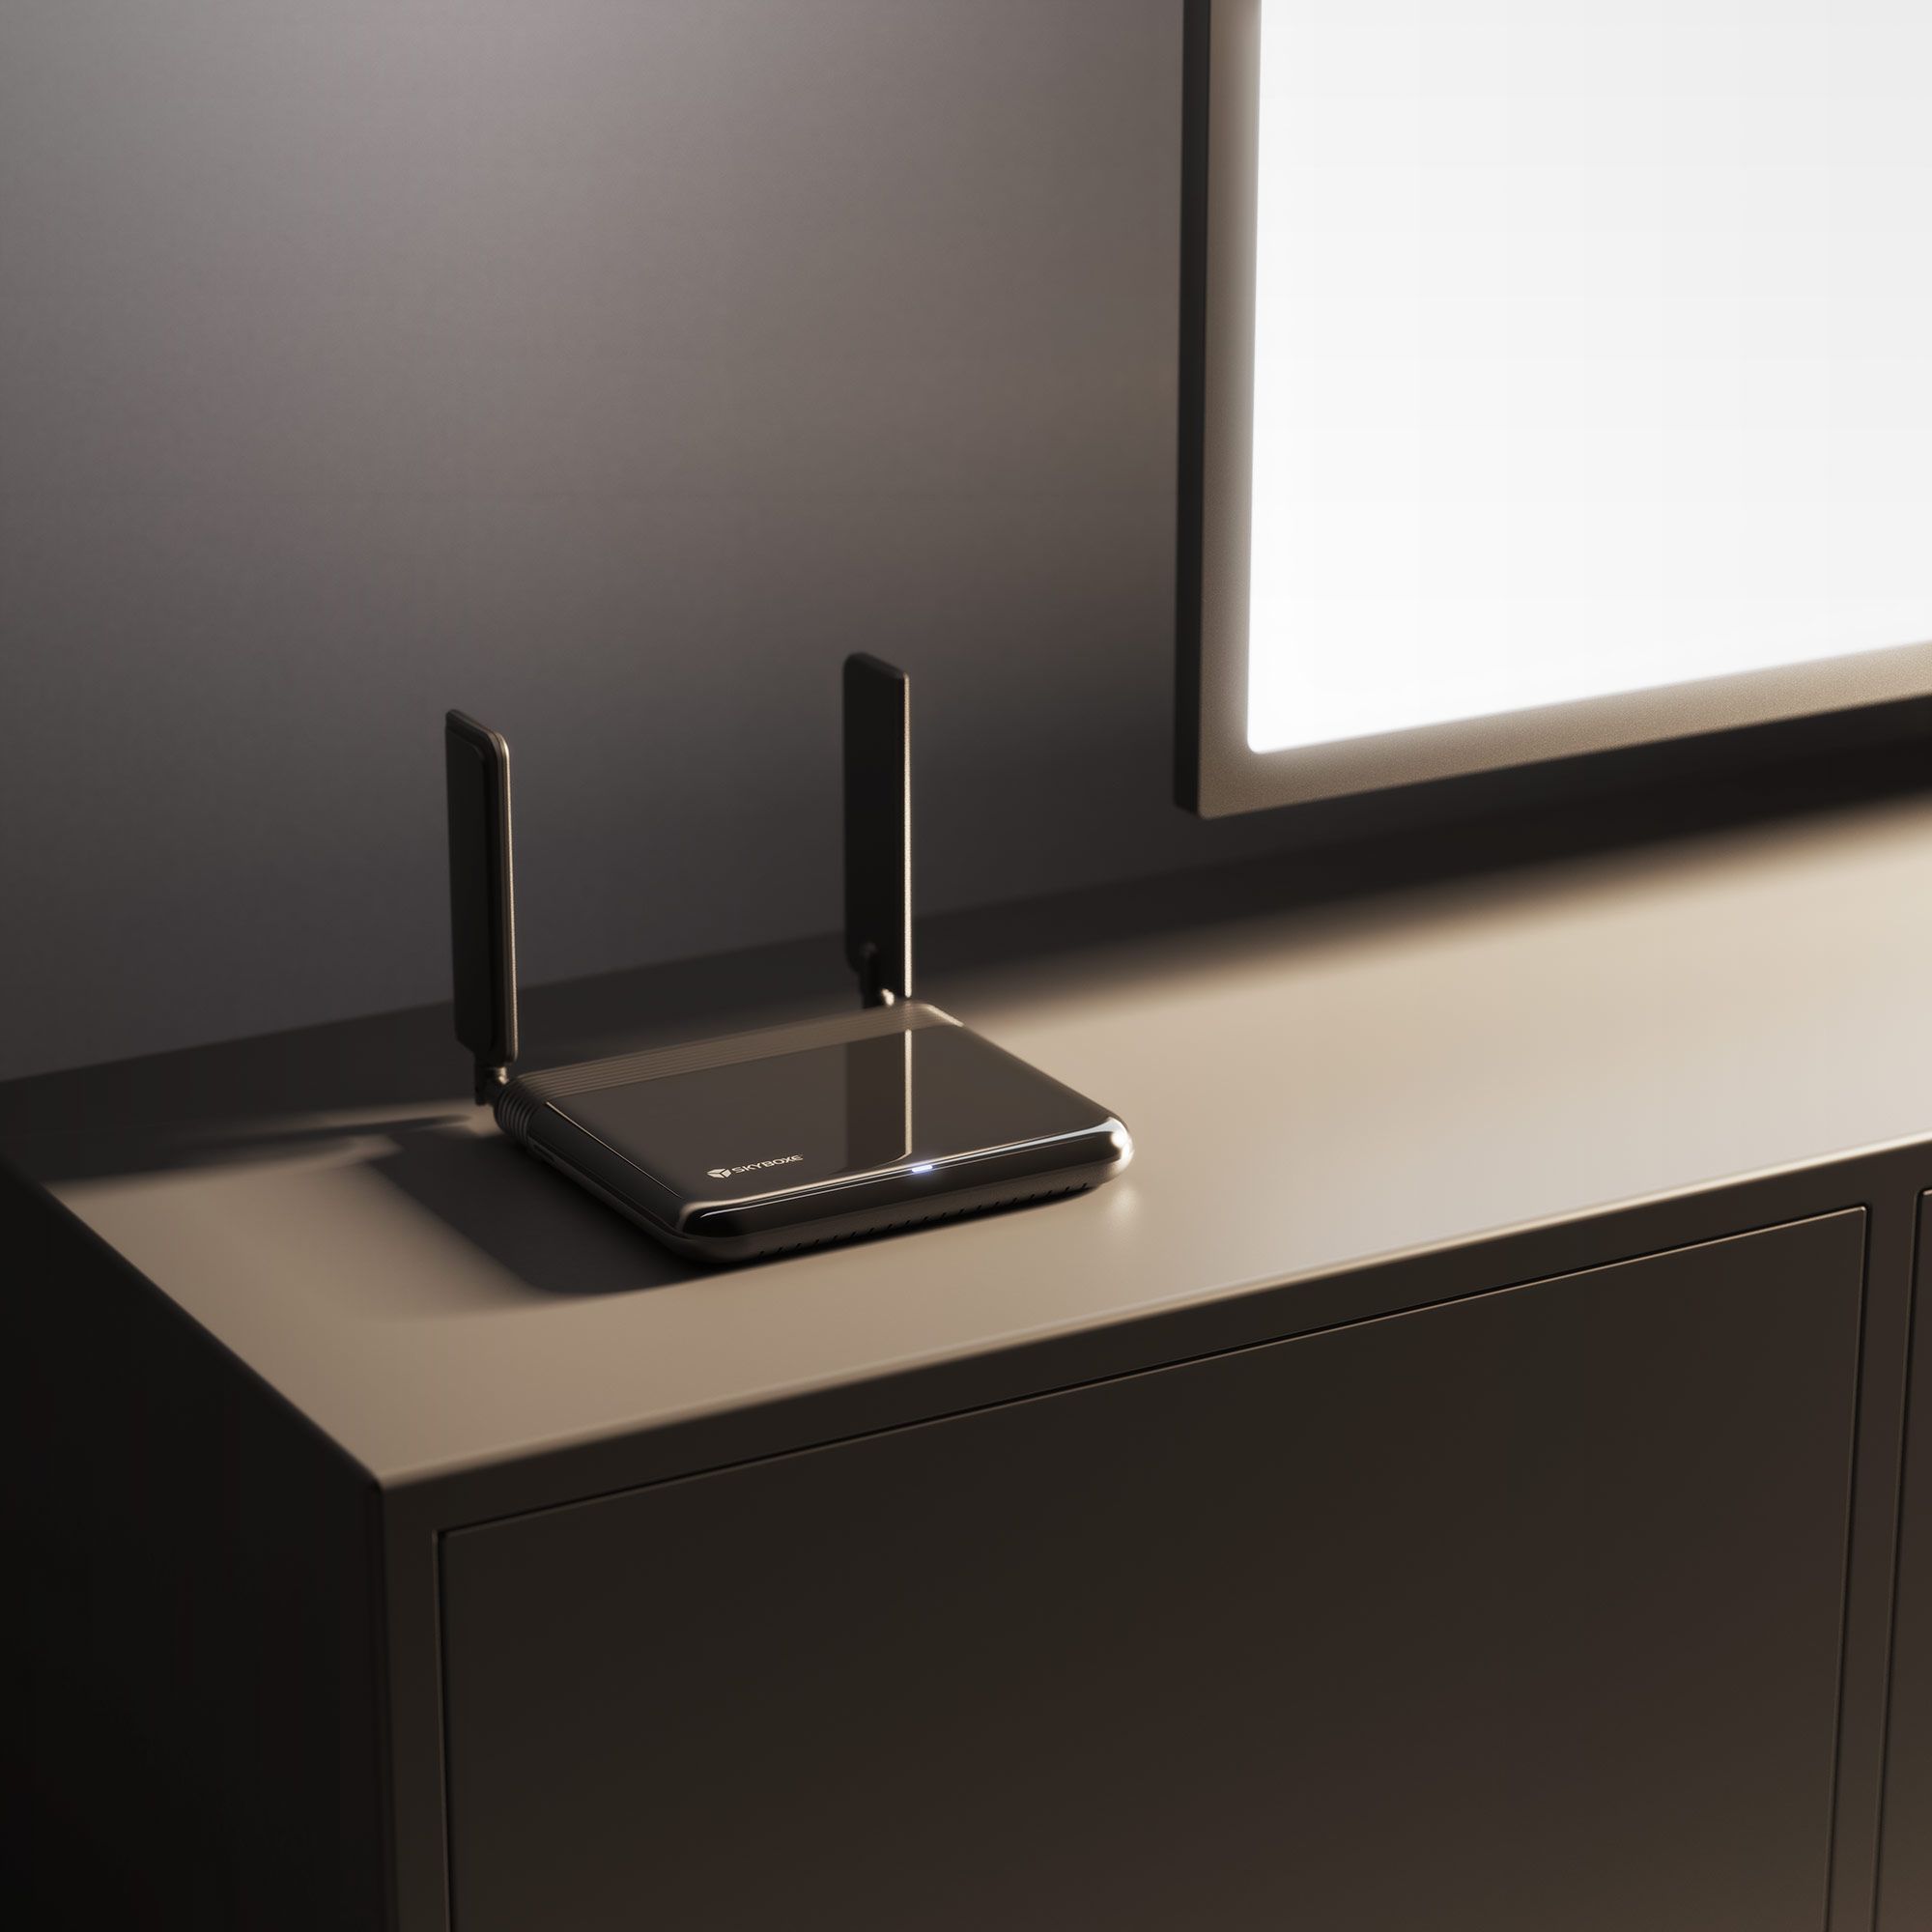 Skyboxe’s ‘All-in-One’ Android TV Hub Gets FCC Approval